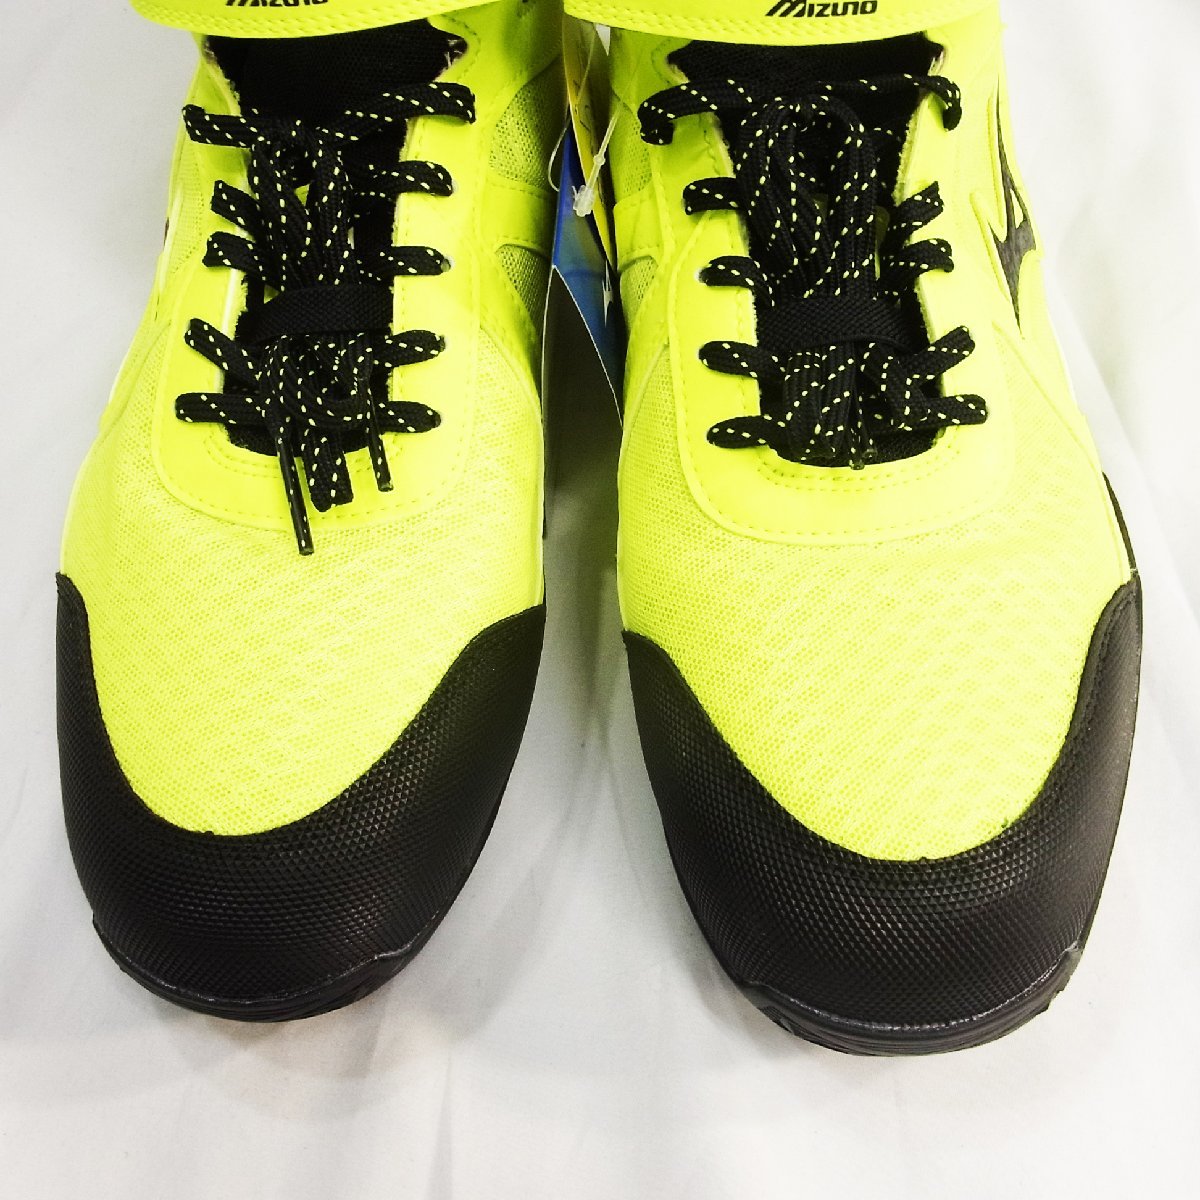  unused goods Mizuno almighty SD13H proactive sneakers safety shoes shoes shoes 27.0cm black × yellow men's Mizuno *